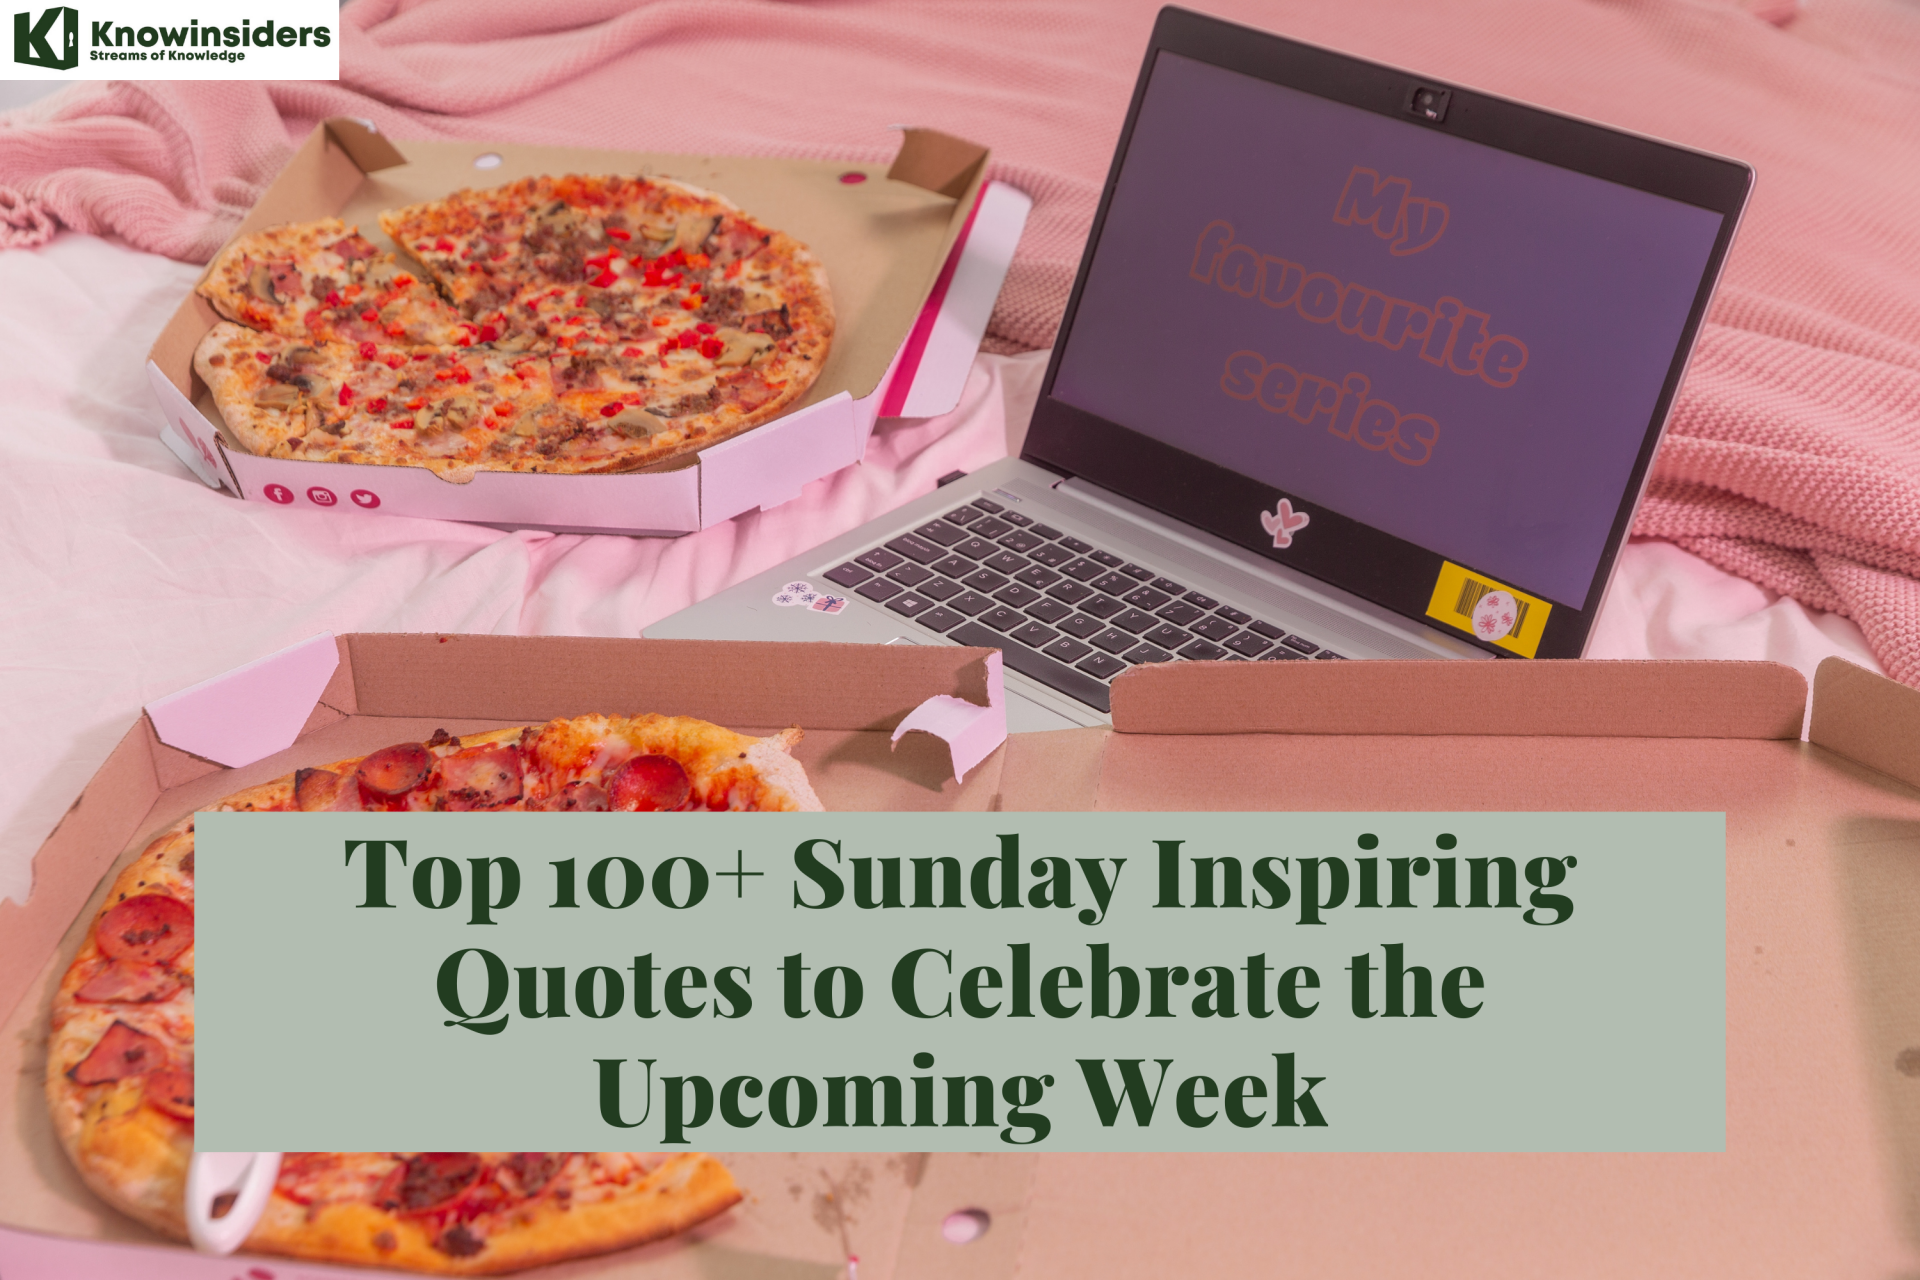 Top 100+ Sunday Inspiring Quotes to Celebrate the Upcoming Week